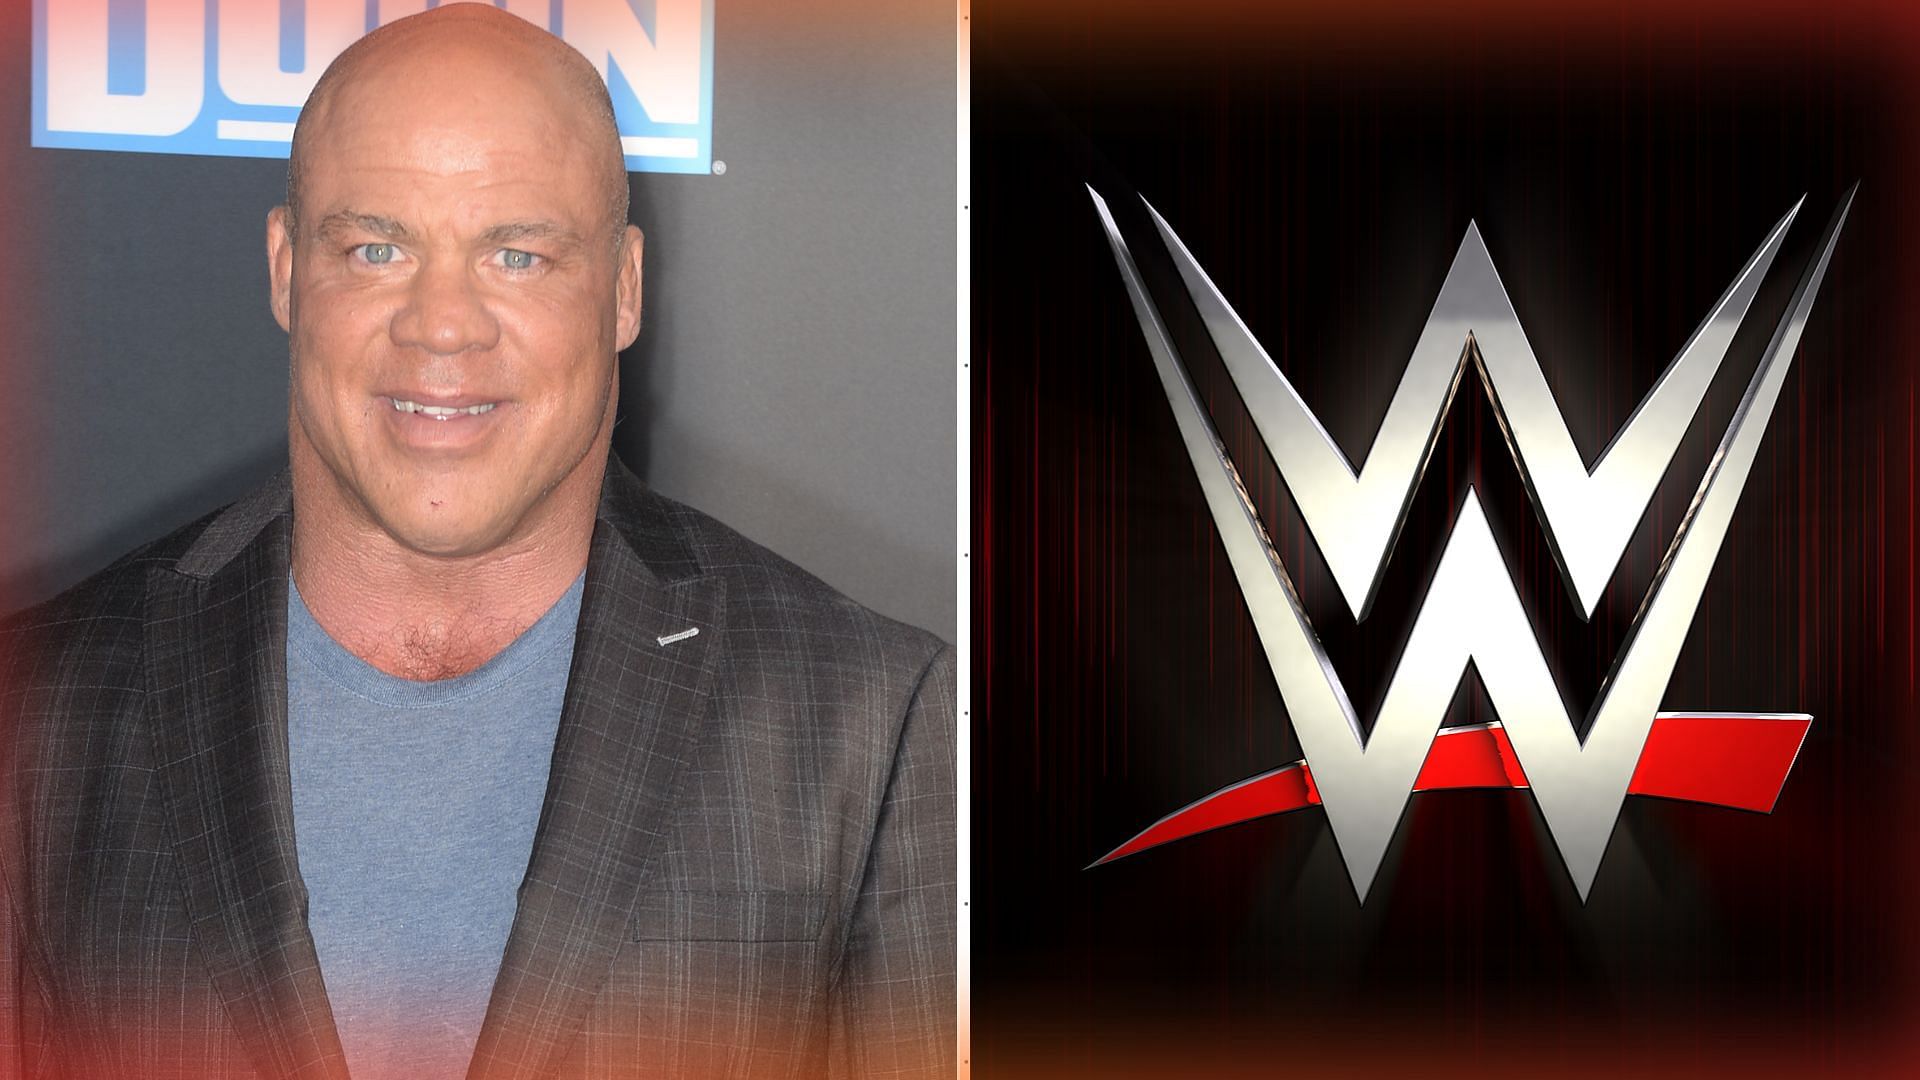 Kurt Angle has had an expansive career in the industry